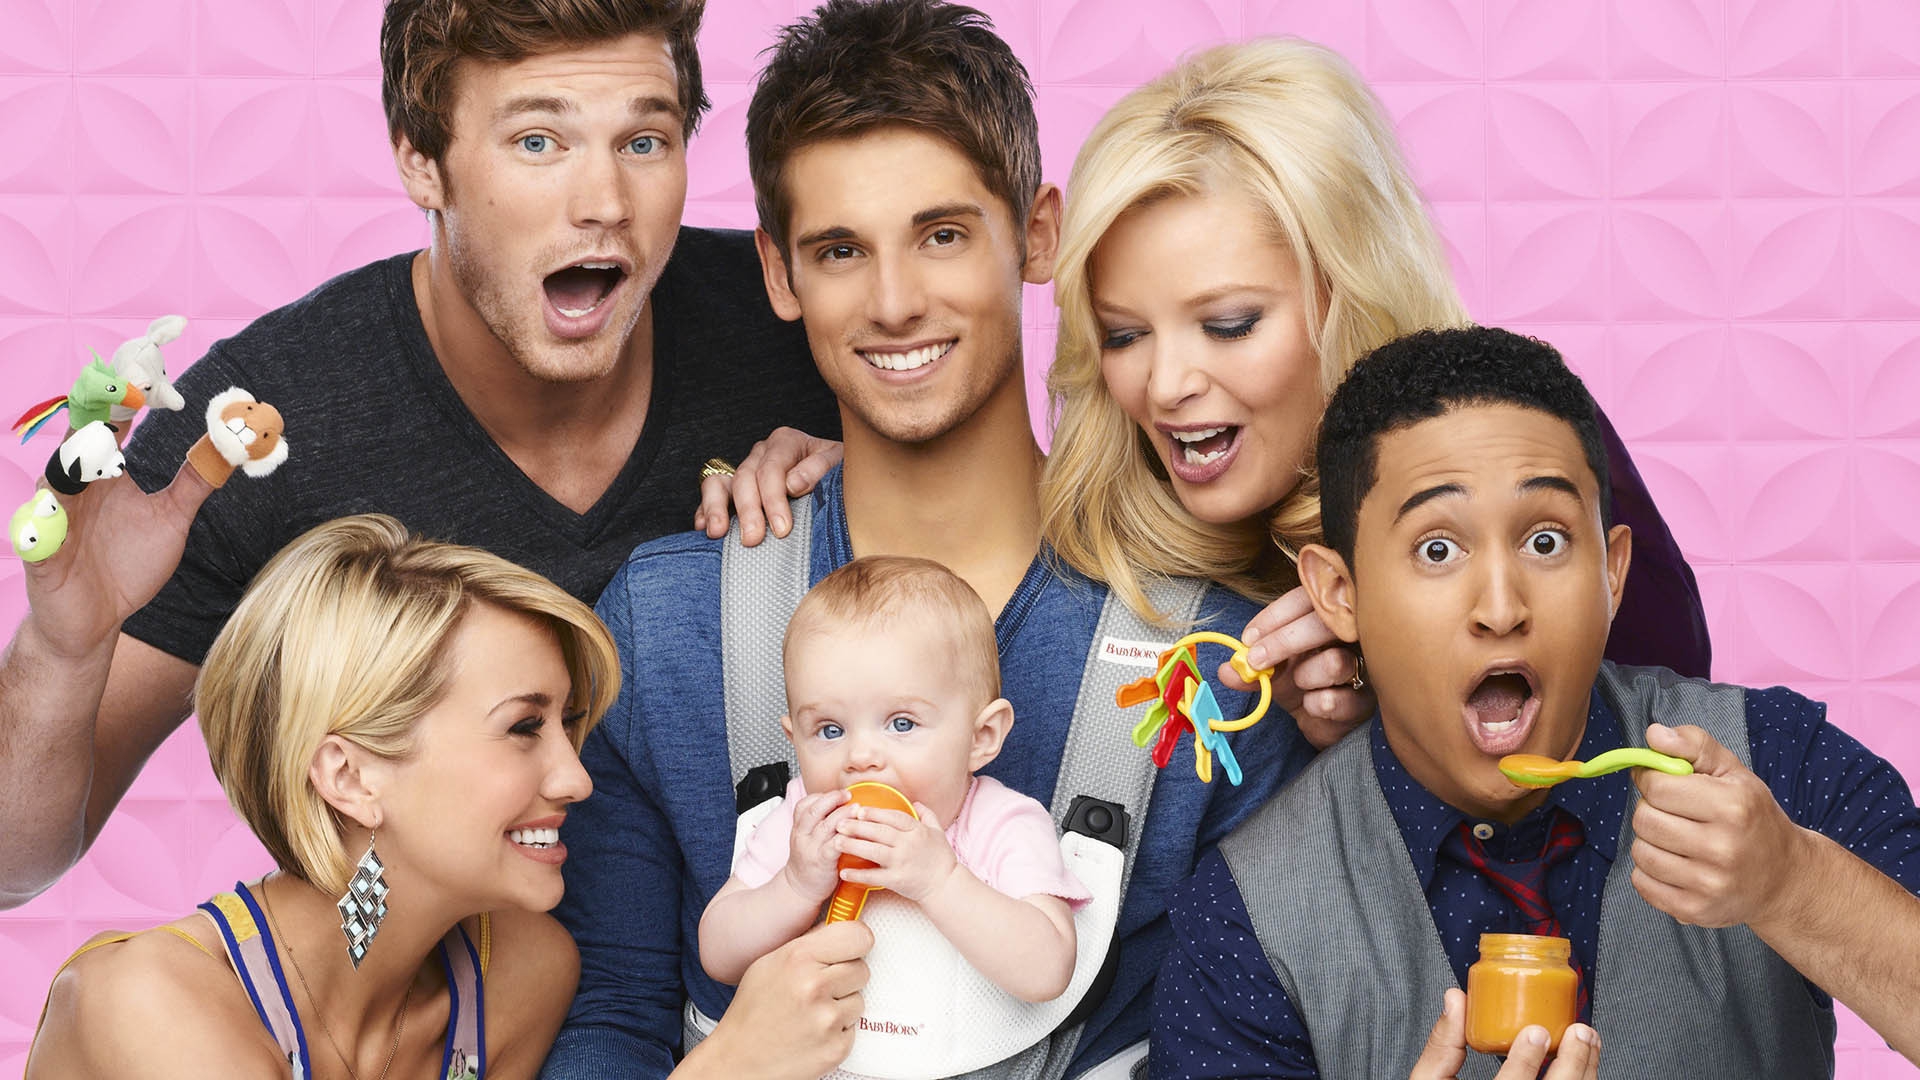 Baby Daddy, is a half-hour series about Ben who, in his 20s, becomes a surp...